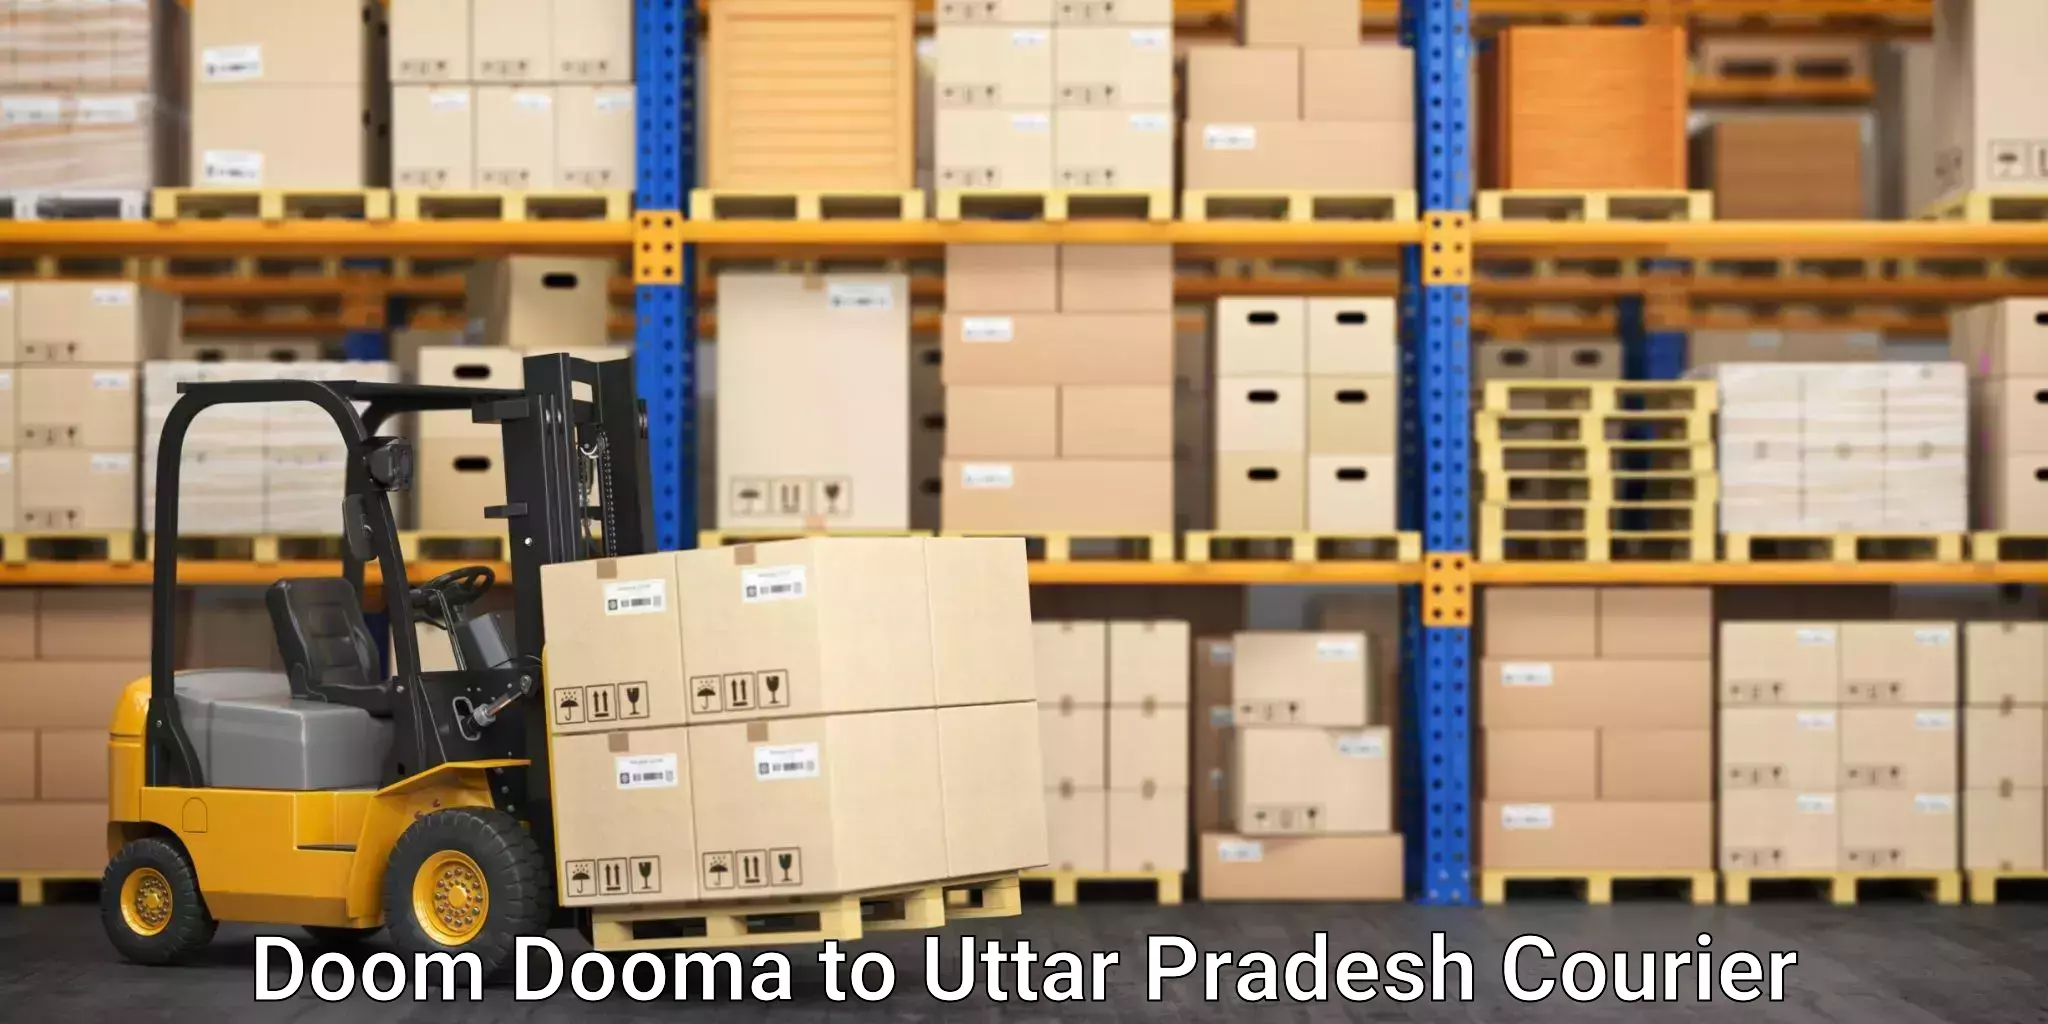 State-of-the-art courier technology Doom Dooma to Dudhinagar